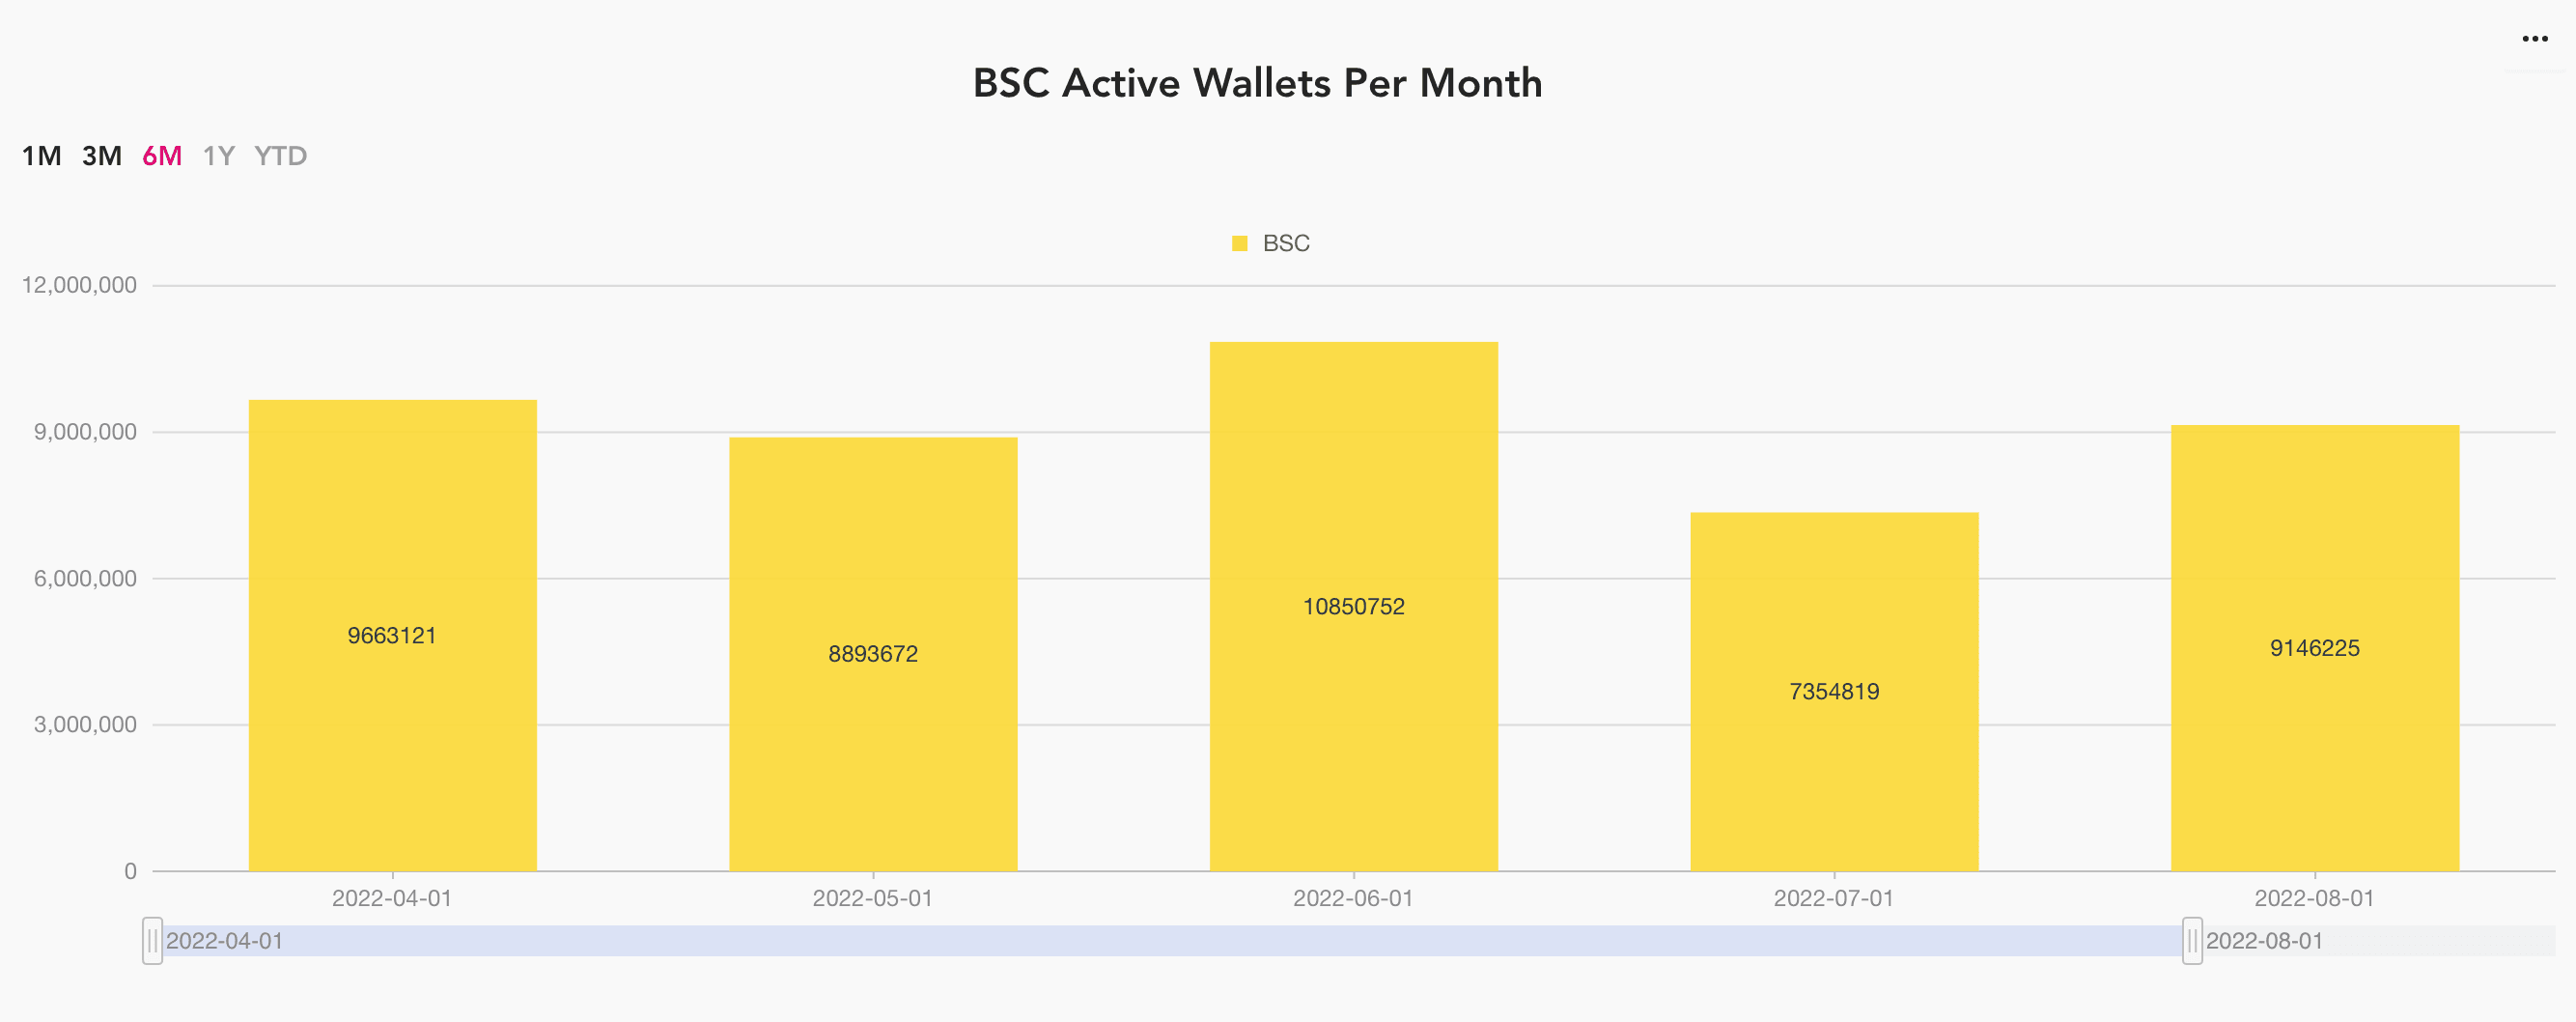 BSC active wallets per month